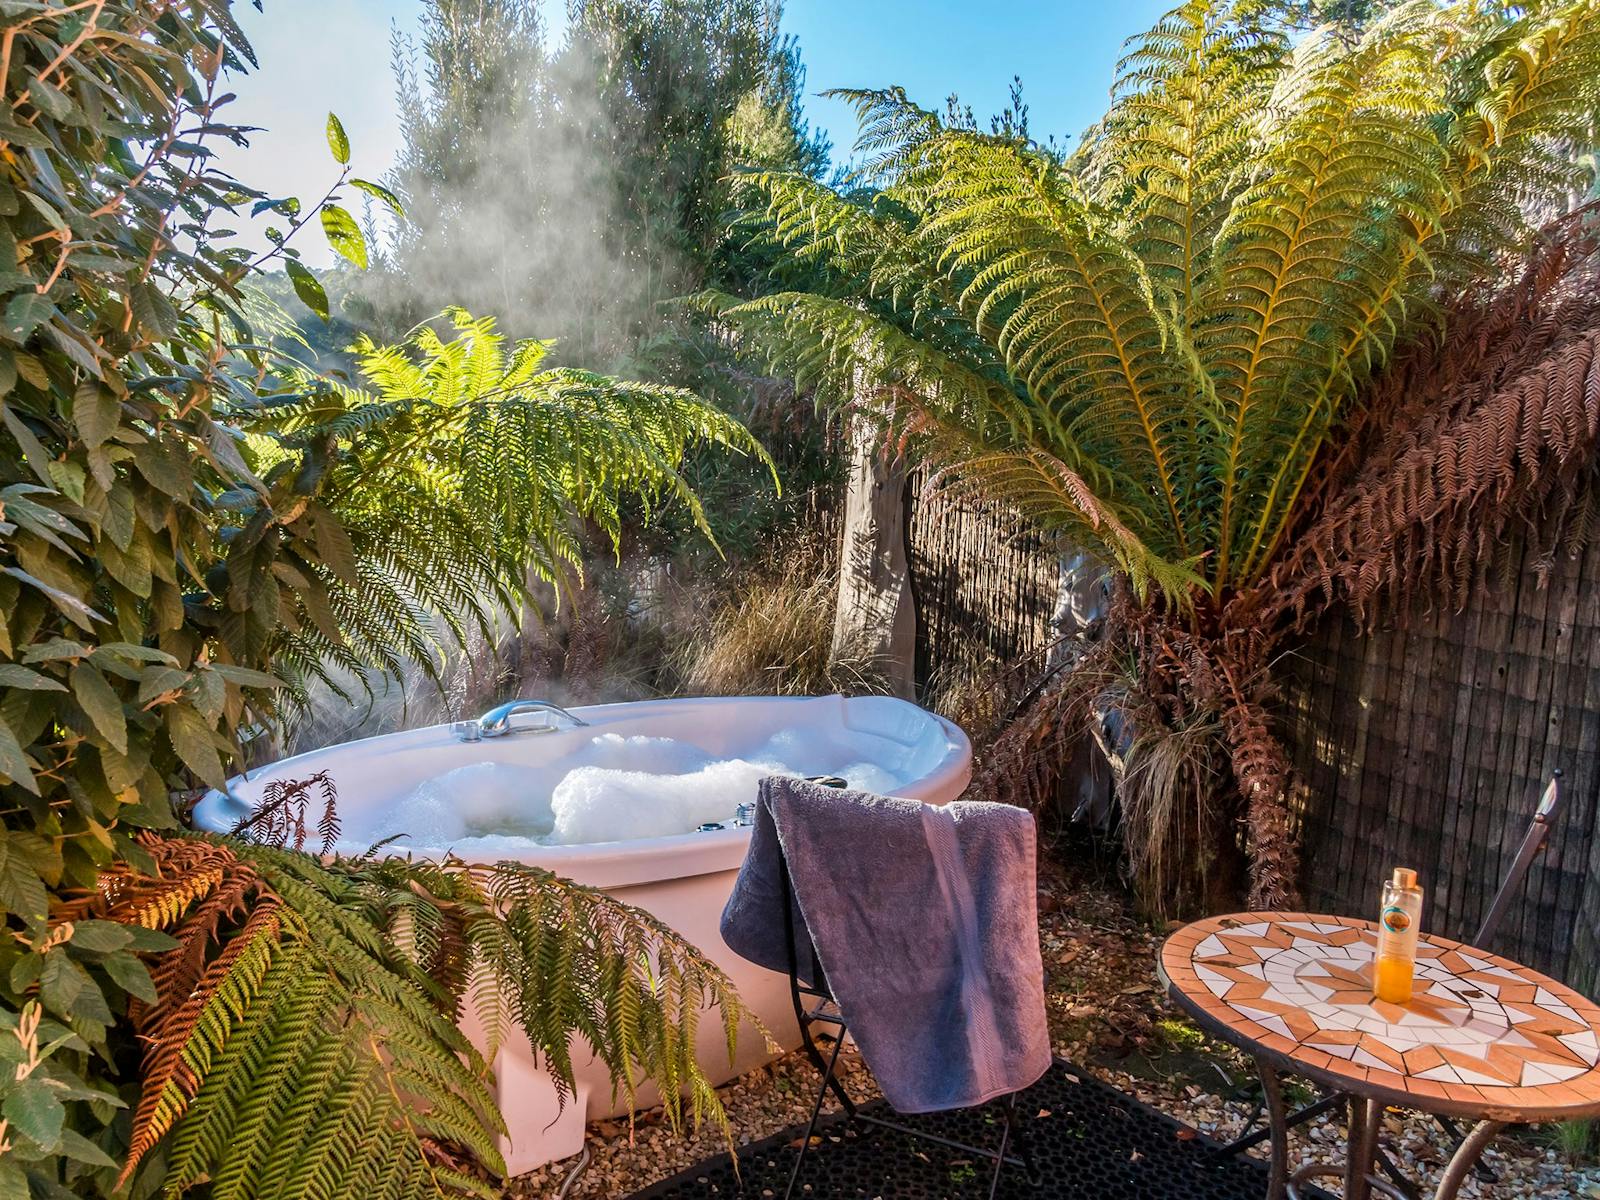 Steam rising from the private outdoor spa surrounded by fern trees